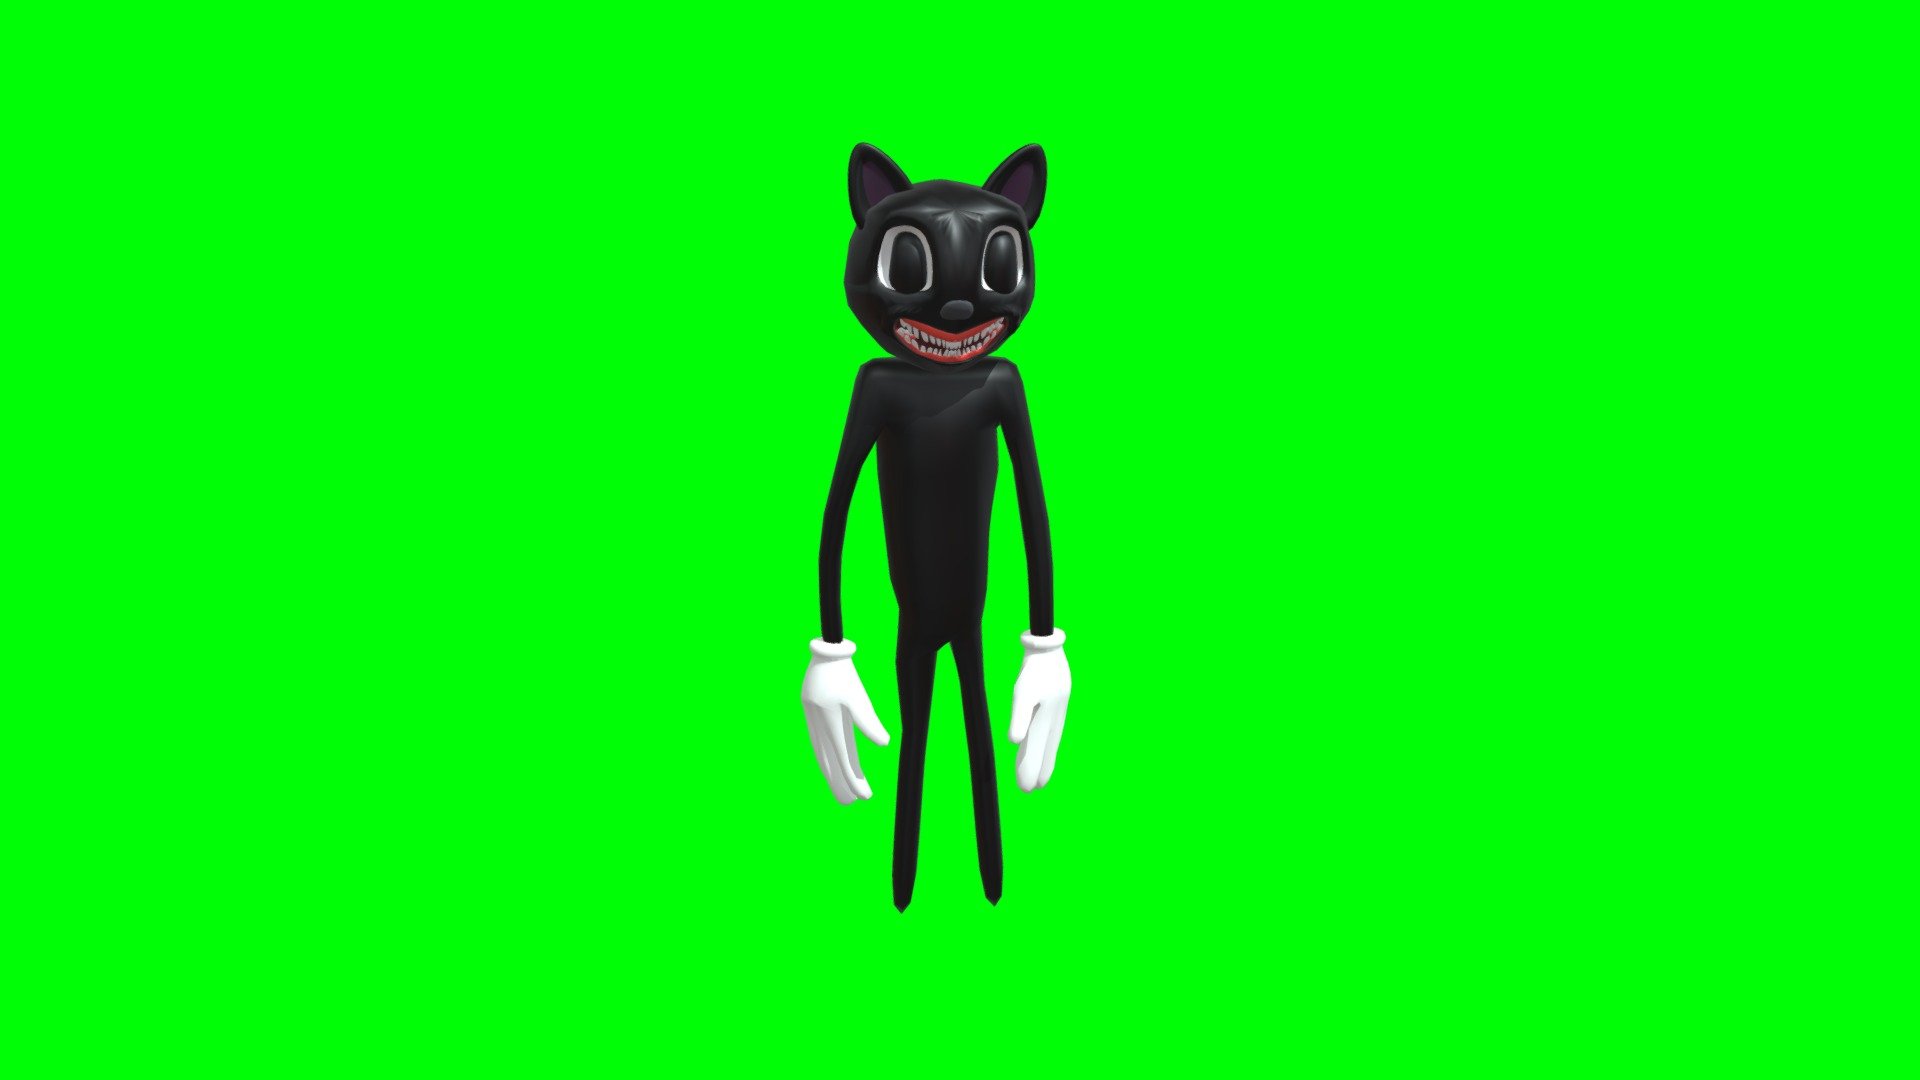 Cartoon Cat from GMOD with all of it's animations from the game, and a green screen background included 3d model